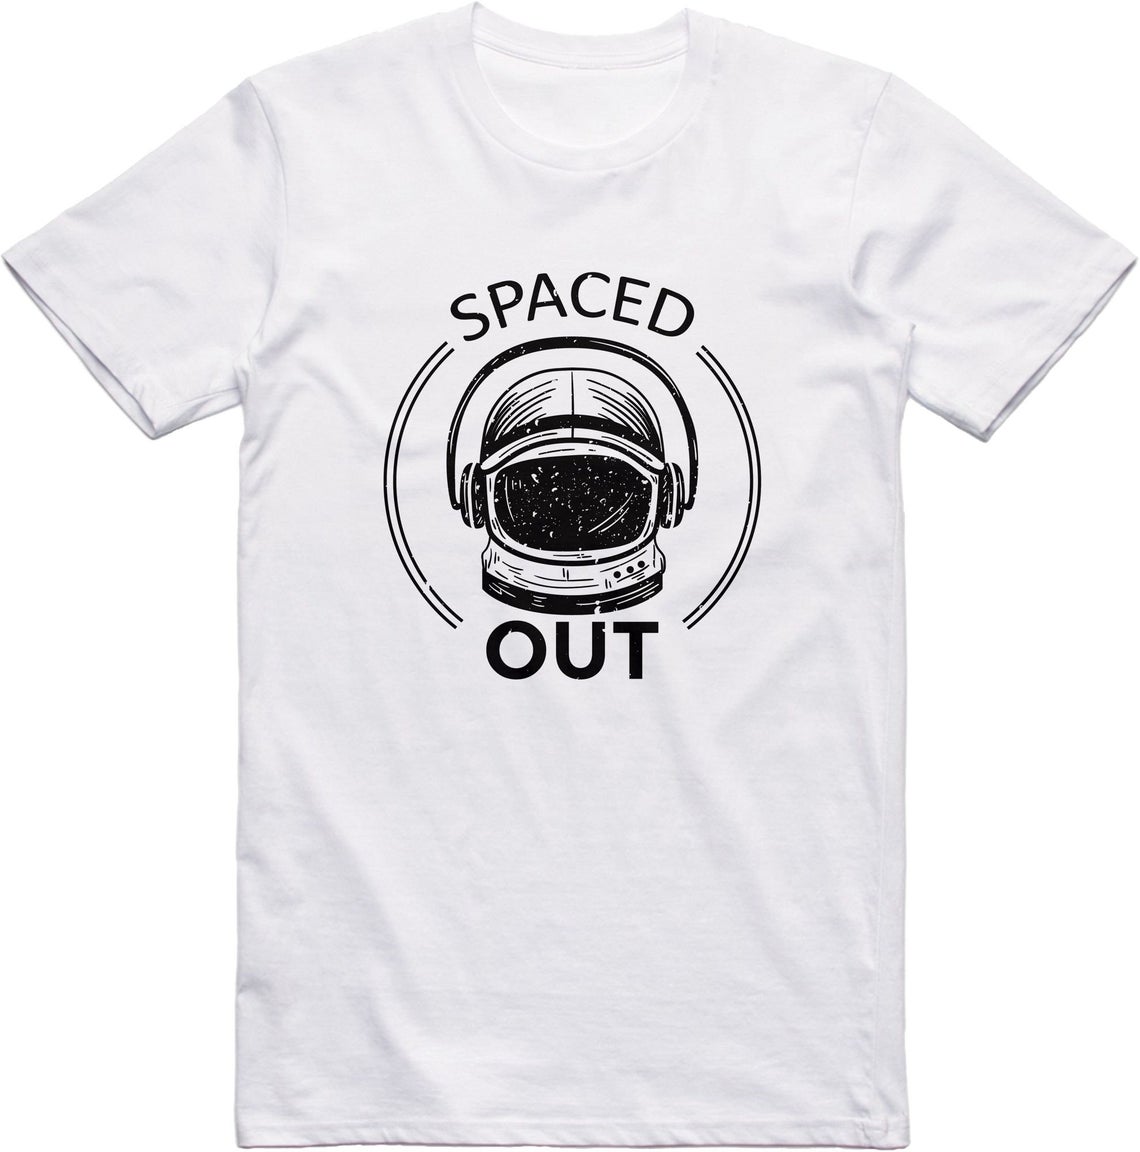 Spaced Out tshirt NA